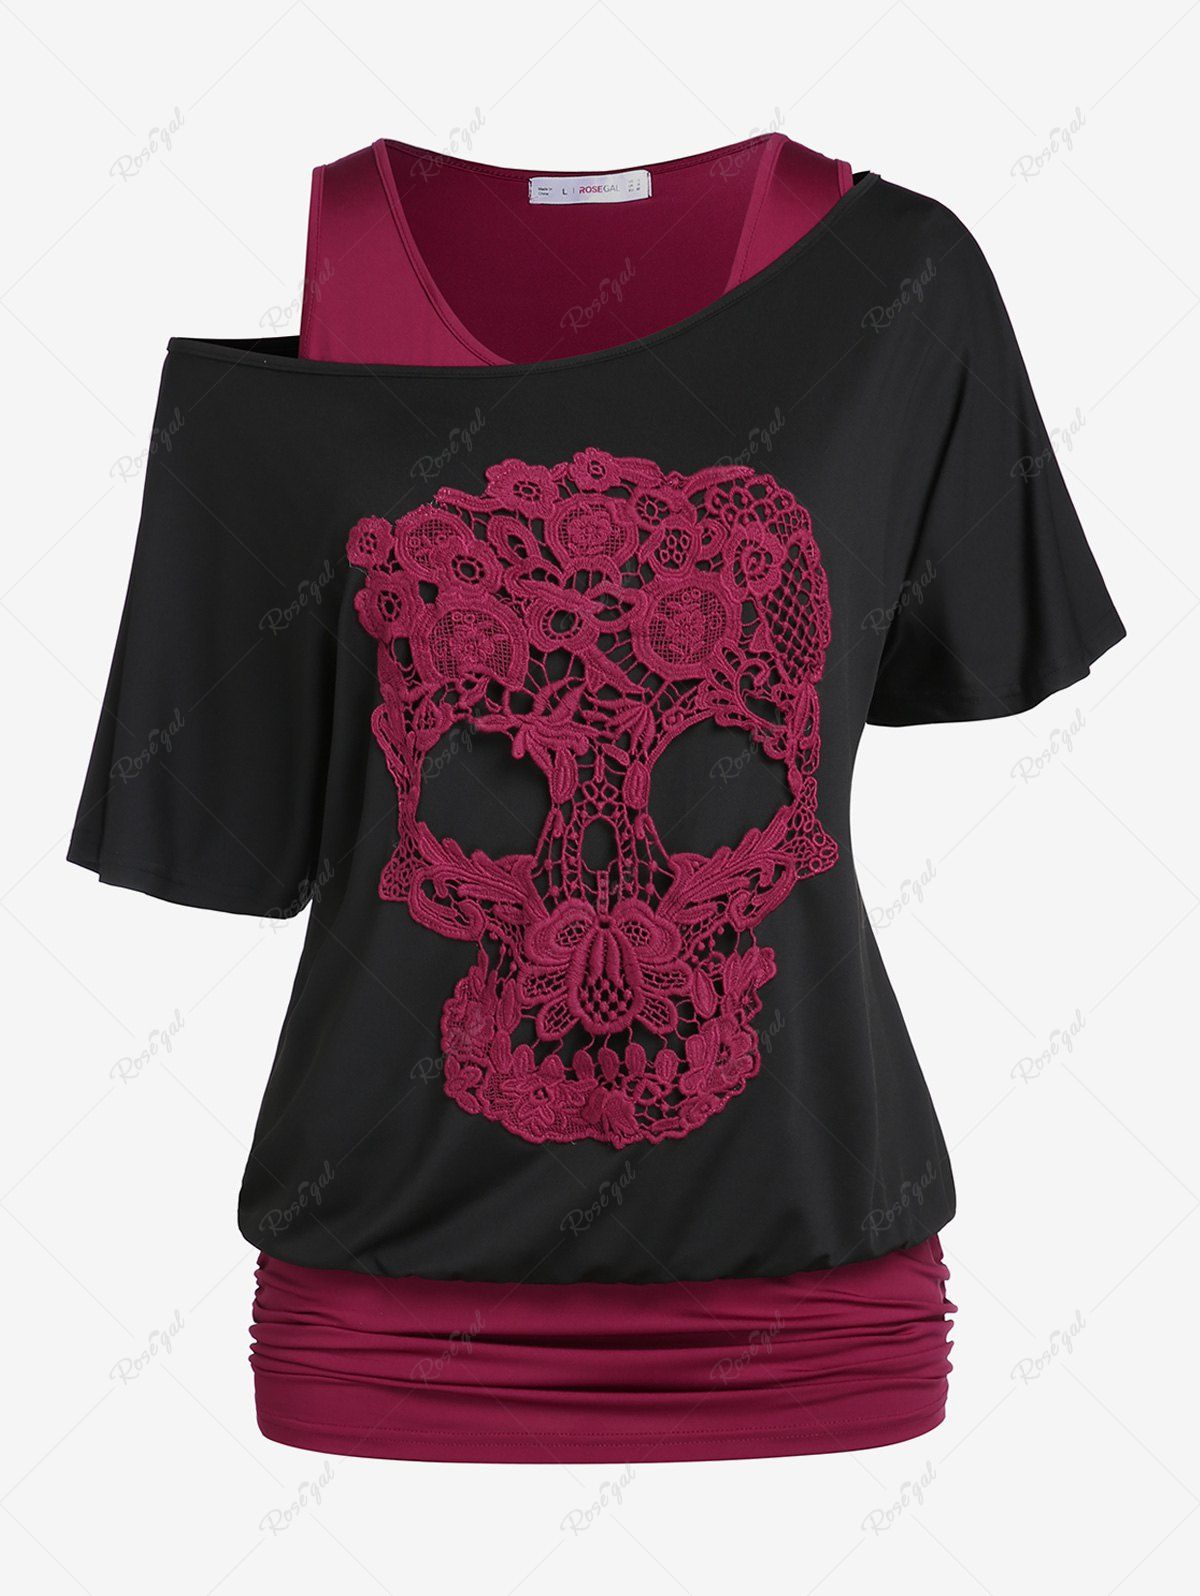 Hot Plus Size & Curve Skew Neck Skull Lace Gothic Tee and Ruched Blouson Tank Top Set  